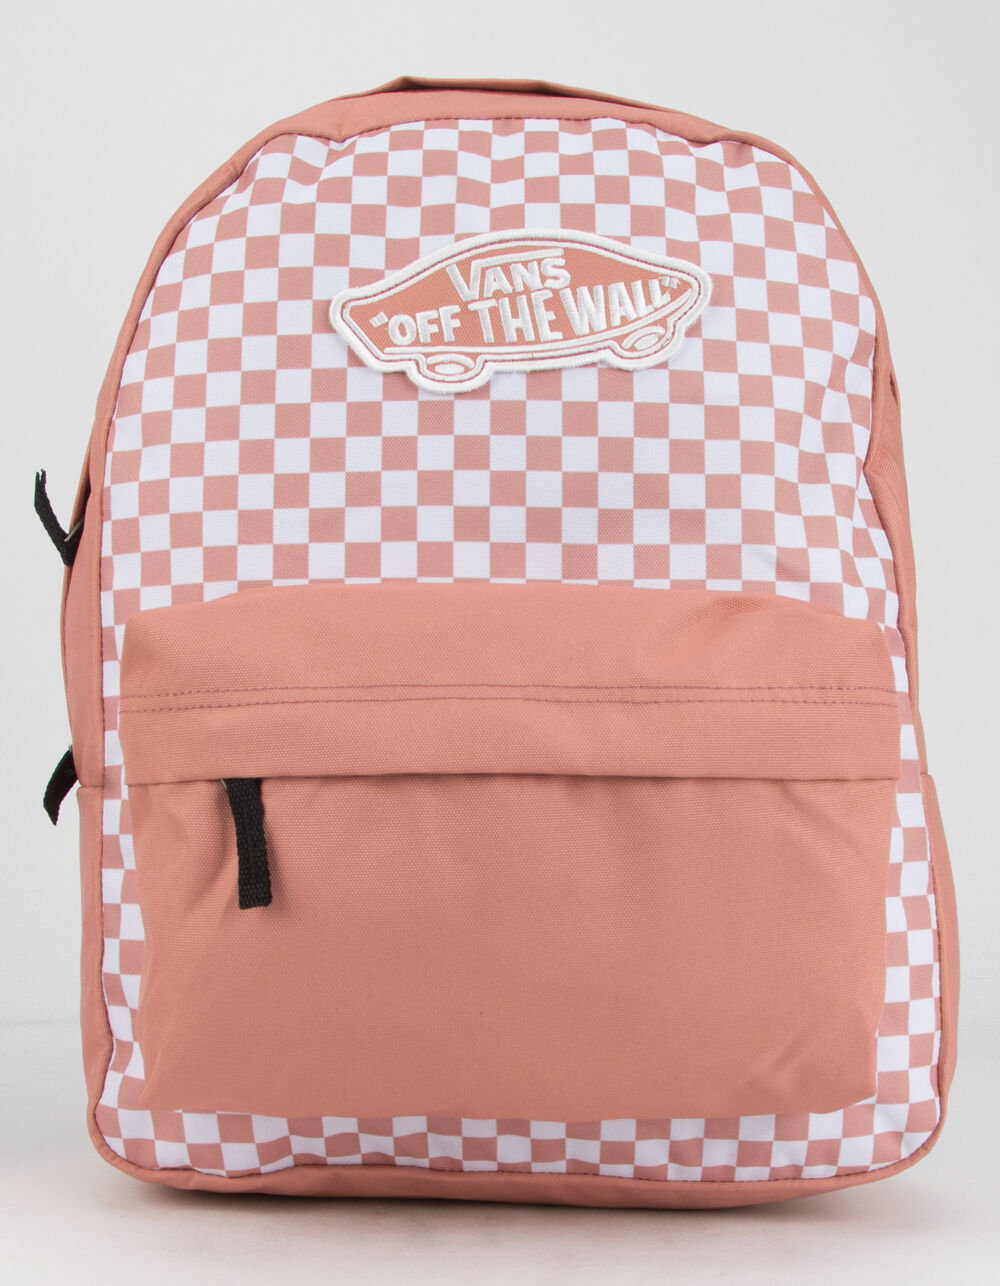 Interesting Sea anemone Stubborn VANS Realm Rose Dawn Checkered Backpack - ROSE DAWN | Tillys